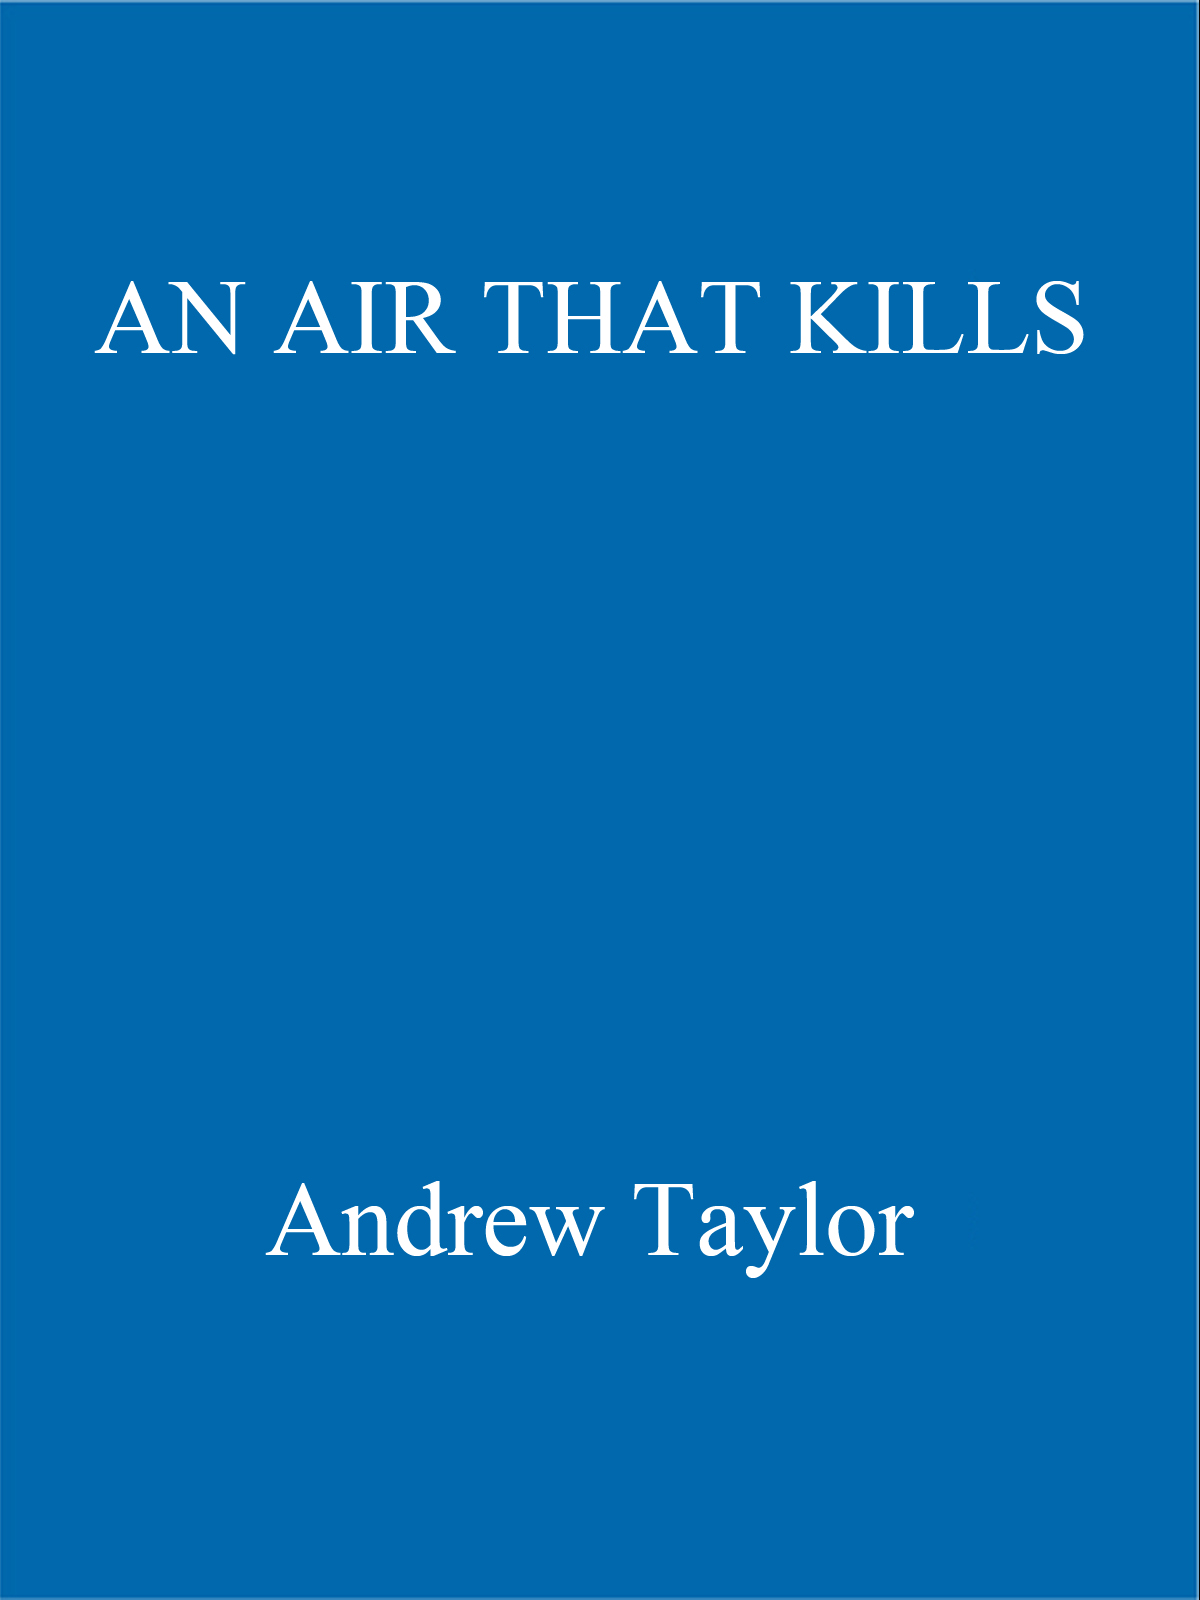 An Air That Kills (2002) by Andrew Taylor